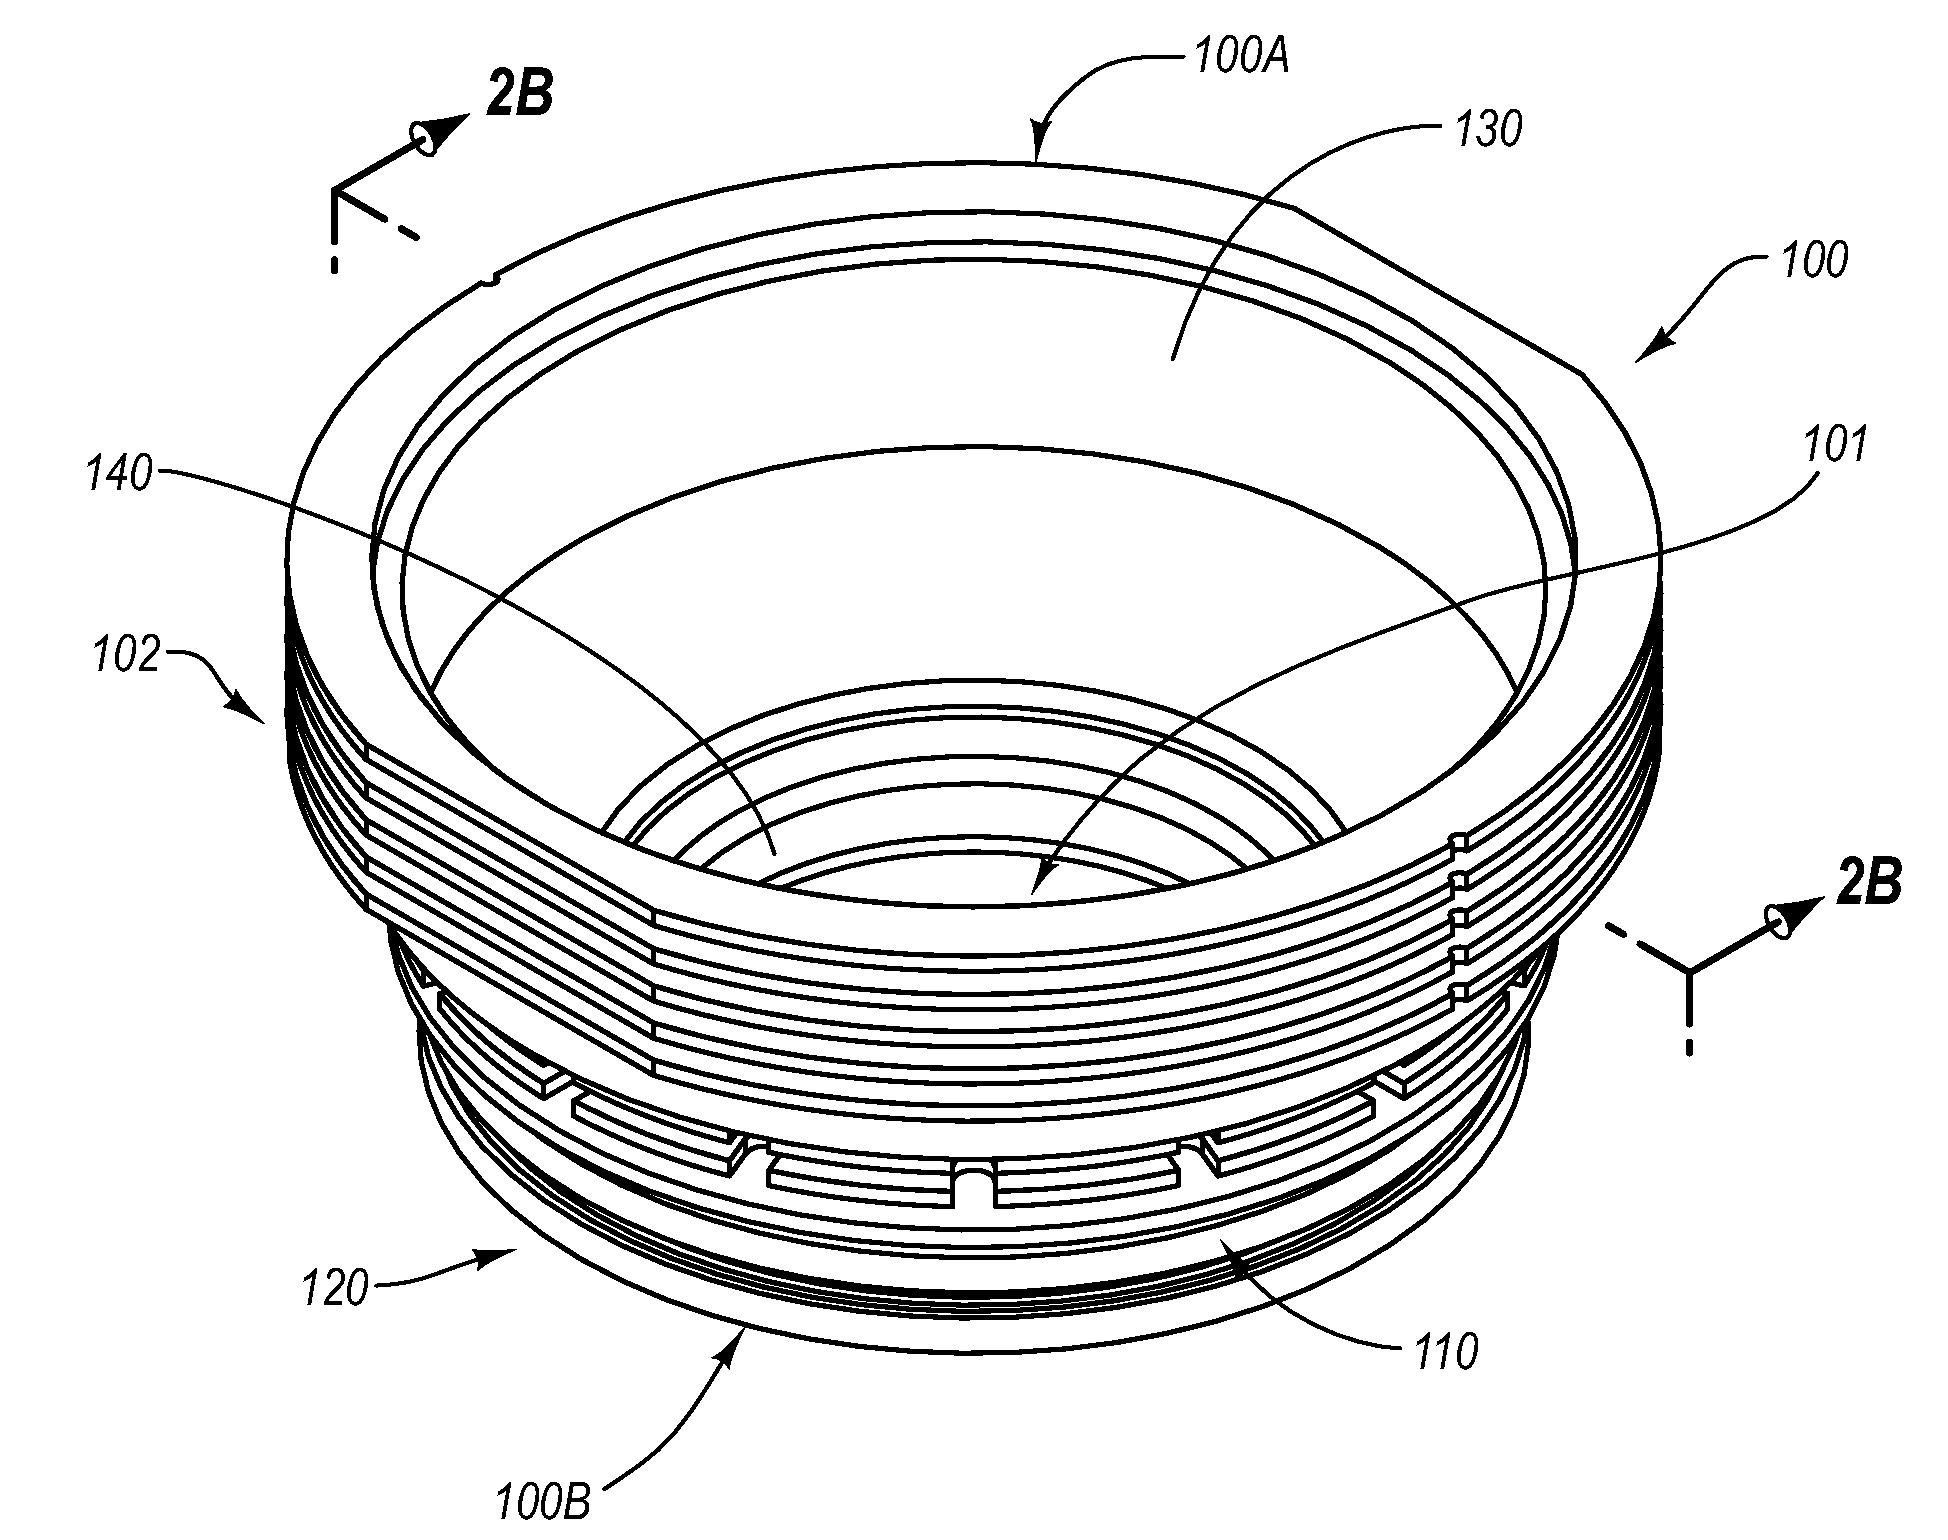 Aperture shield incorporating refractory materials